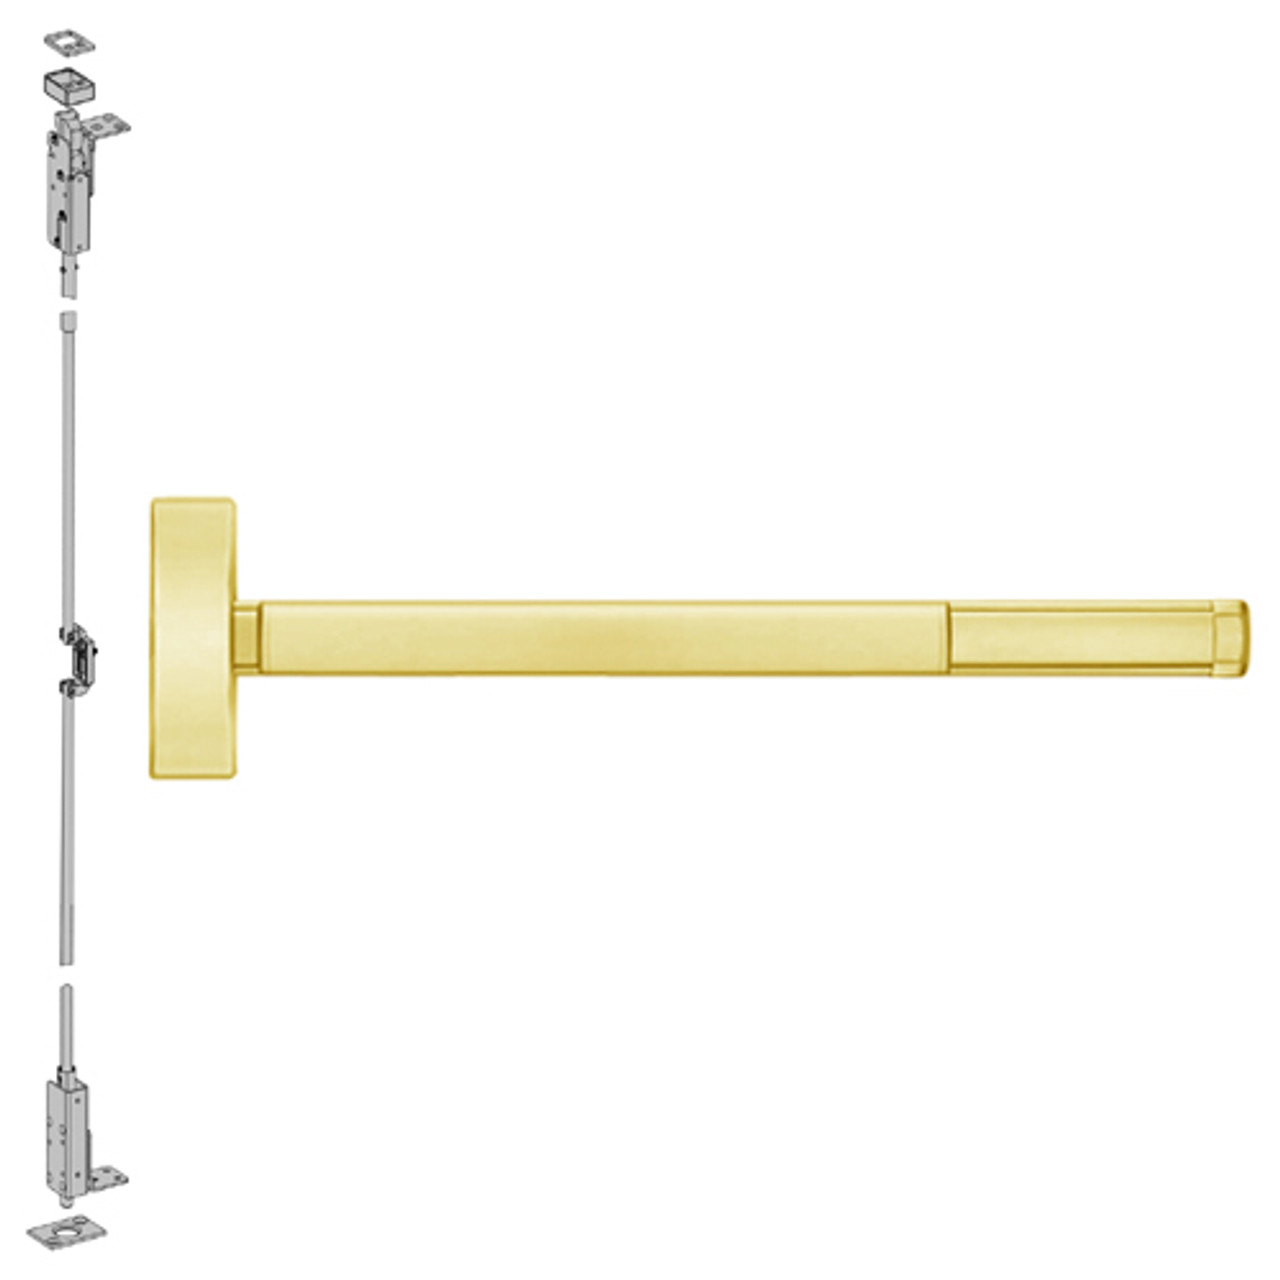 2703CD-605-36 PHI 2700 Series Wood Door Concealed Vertical Rod Device Prepped for Key Retracts Latchbolt with Cylinder Dogging in Bright Brass Finish